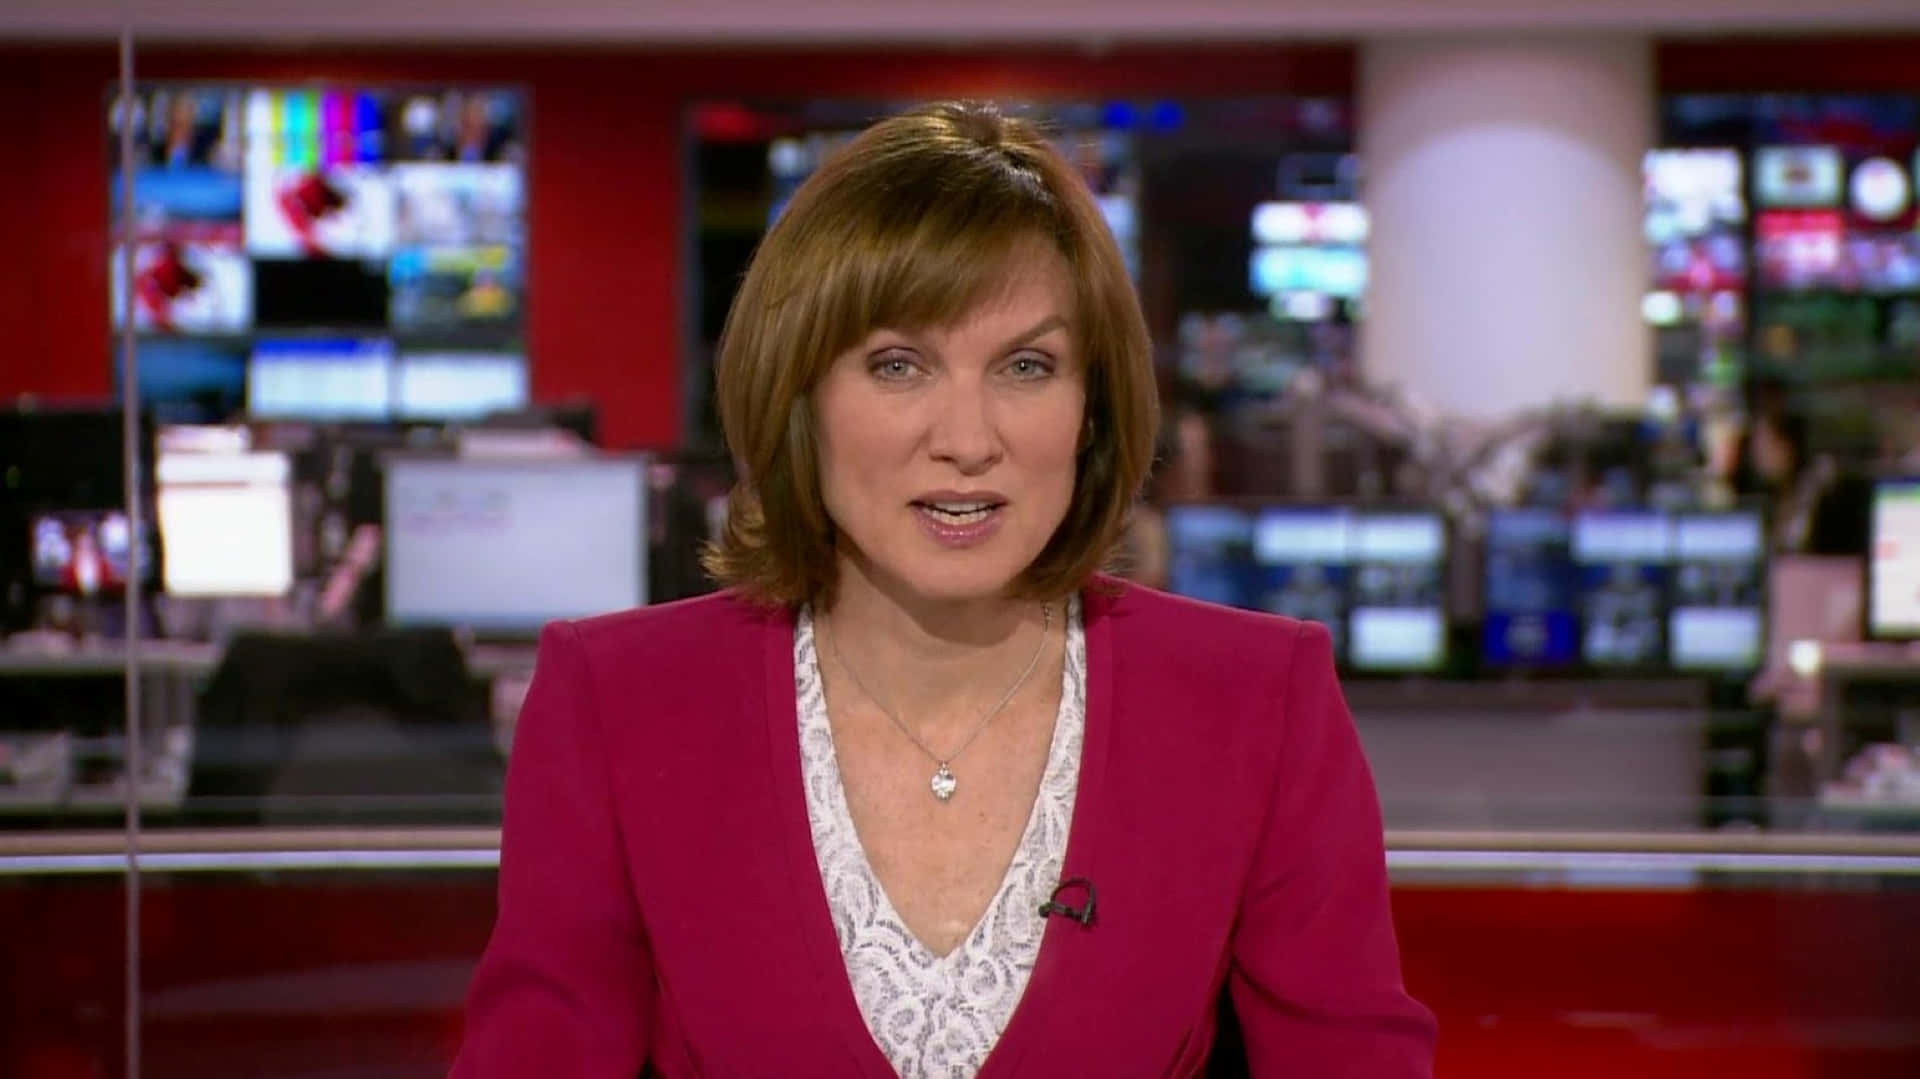 Fiona Bruce posing elegantly in a sophisticated outfit Wallpaper